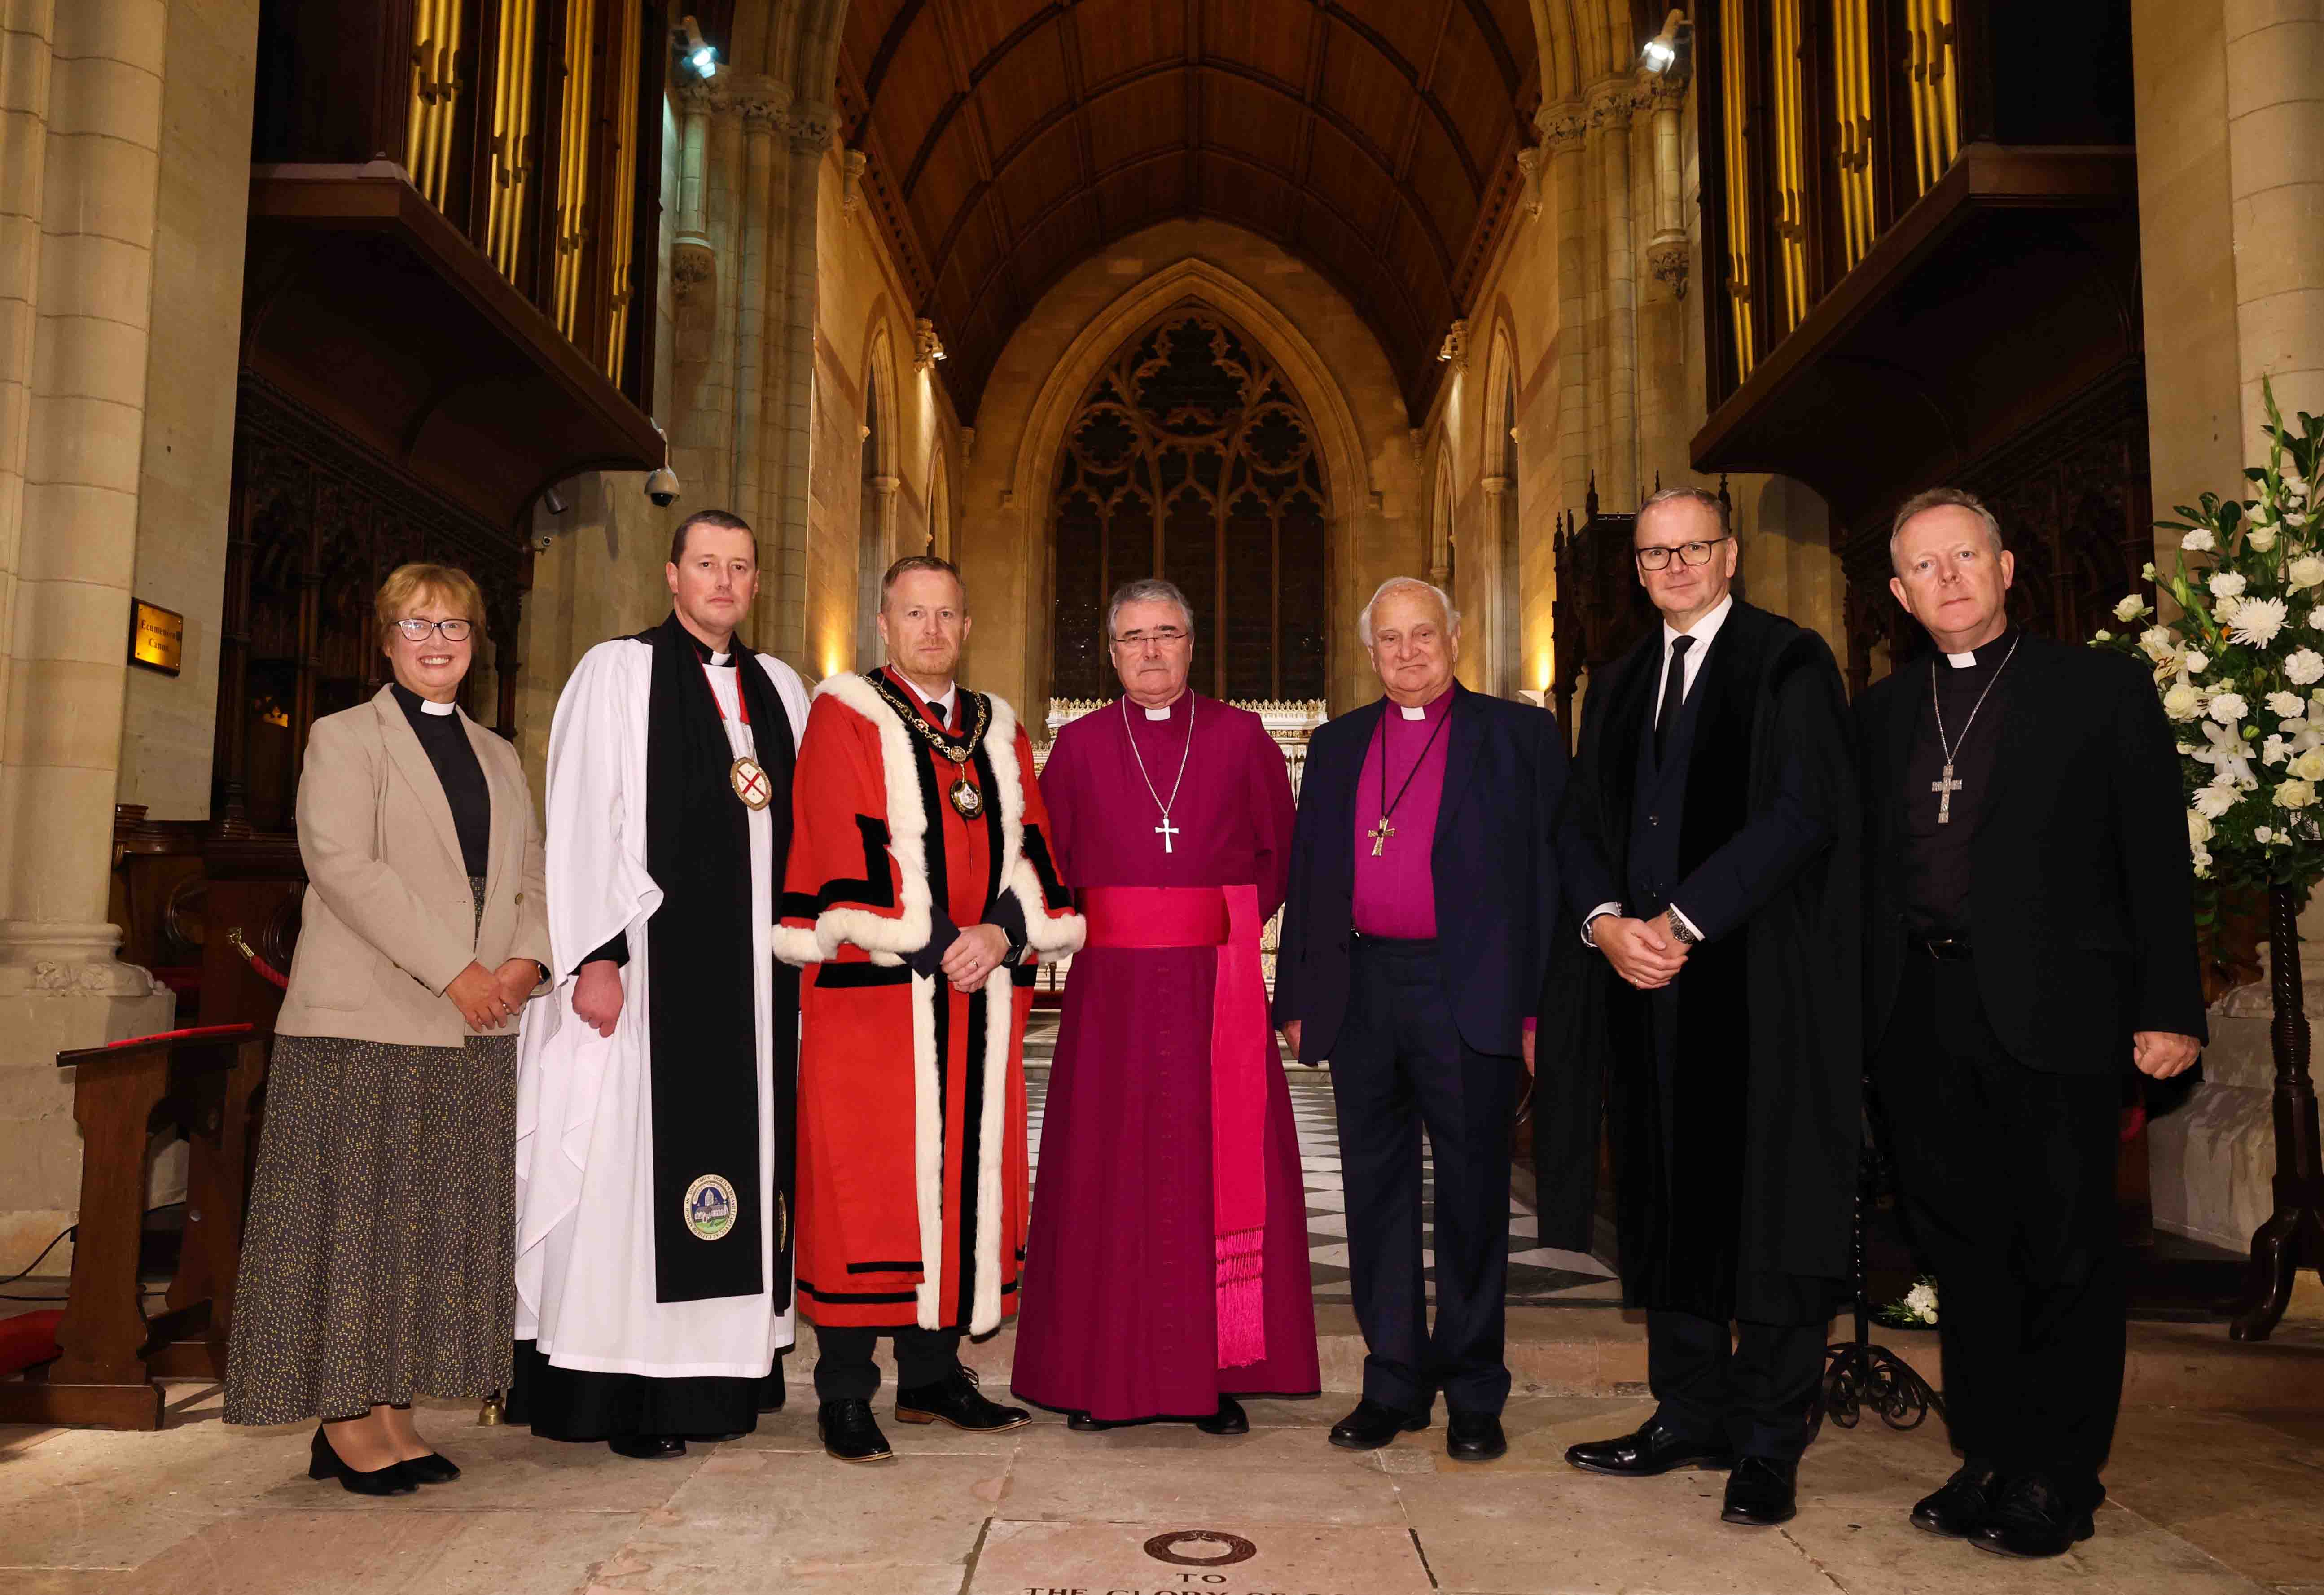 Dr Morris, Dean Shane Forster, Lord Mayor Paul Greenfield, Archbishop McDowell, Lord Eames, Roger Wilson (Chief Executive, Armagh, Banbridge and Craigavon Borough Council) and Archbishop Eamon Martin.